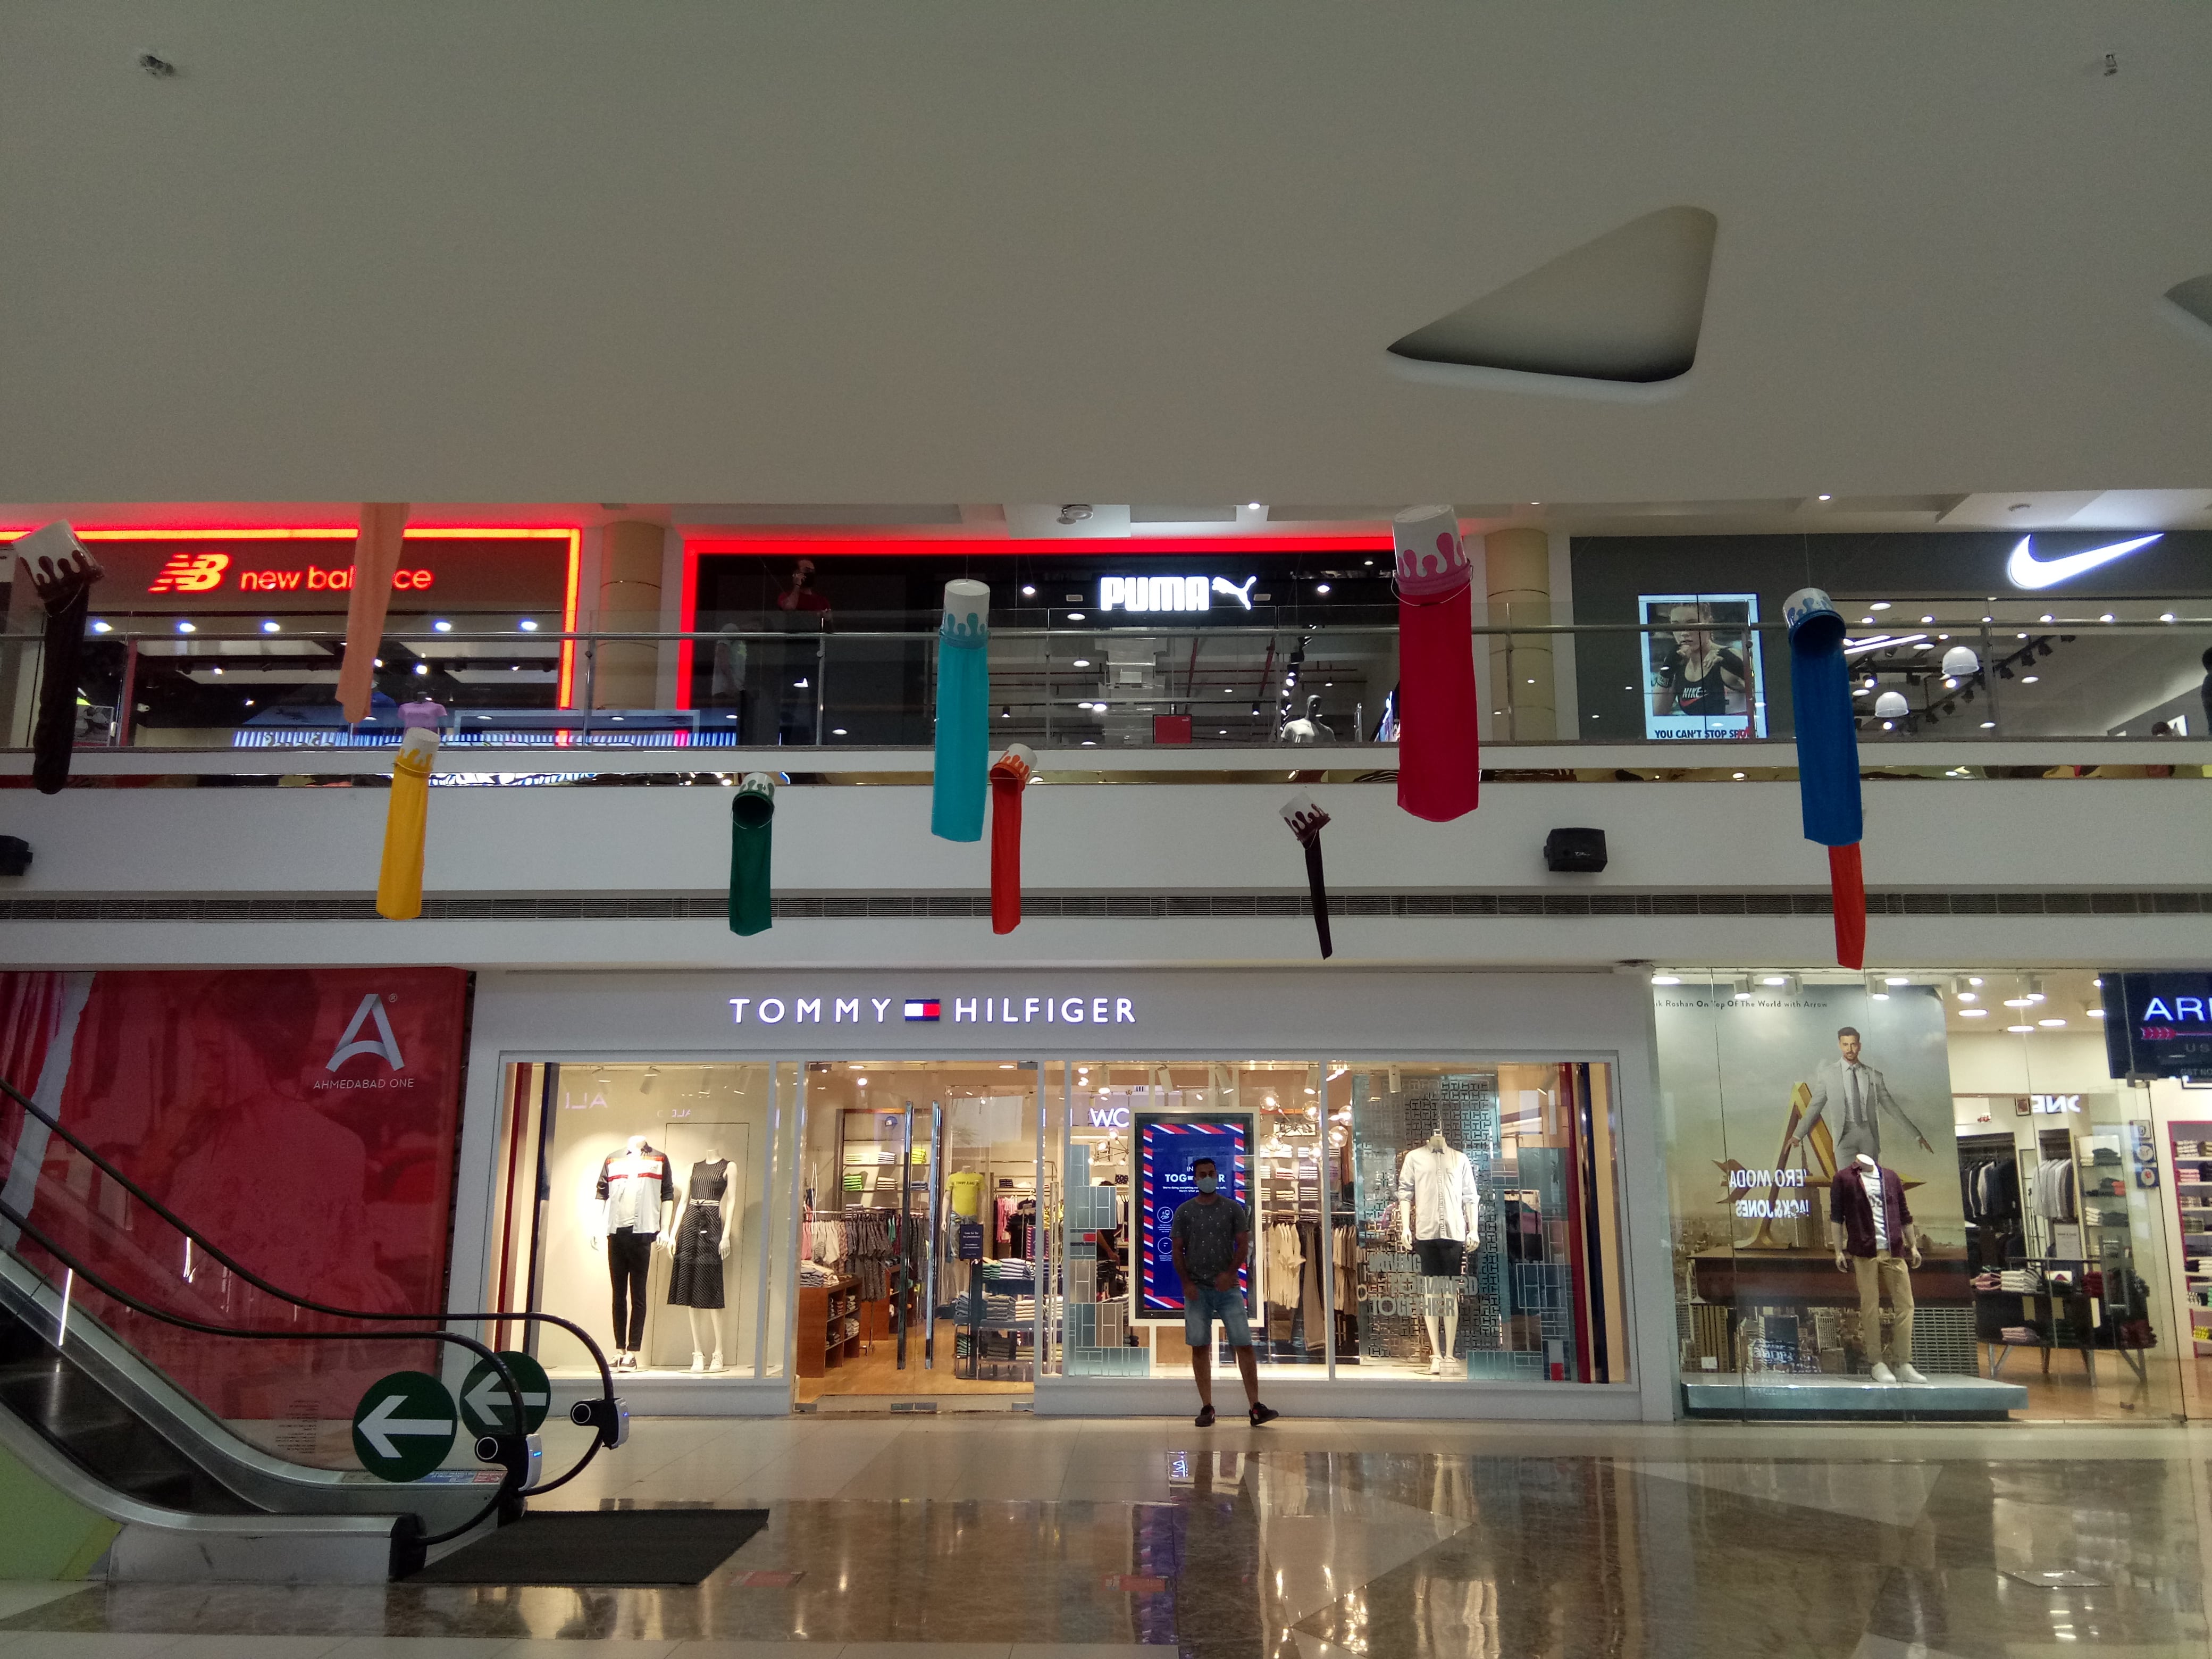 Alpha one mall - luxury mall - retail therapy - ahmedabad